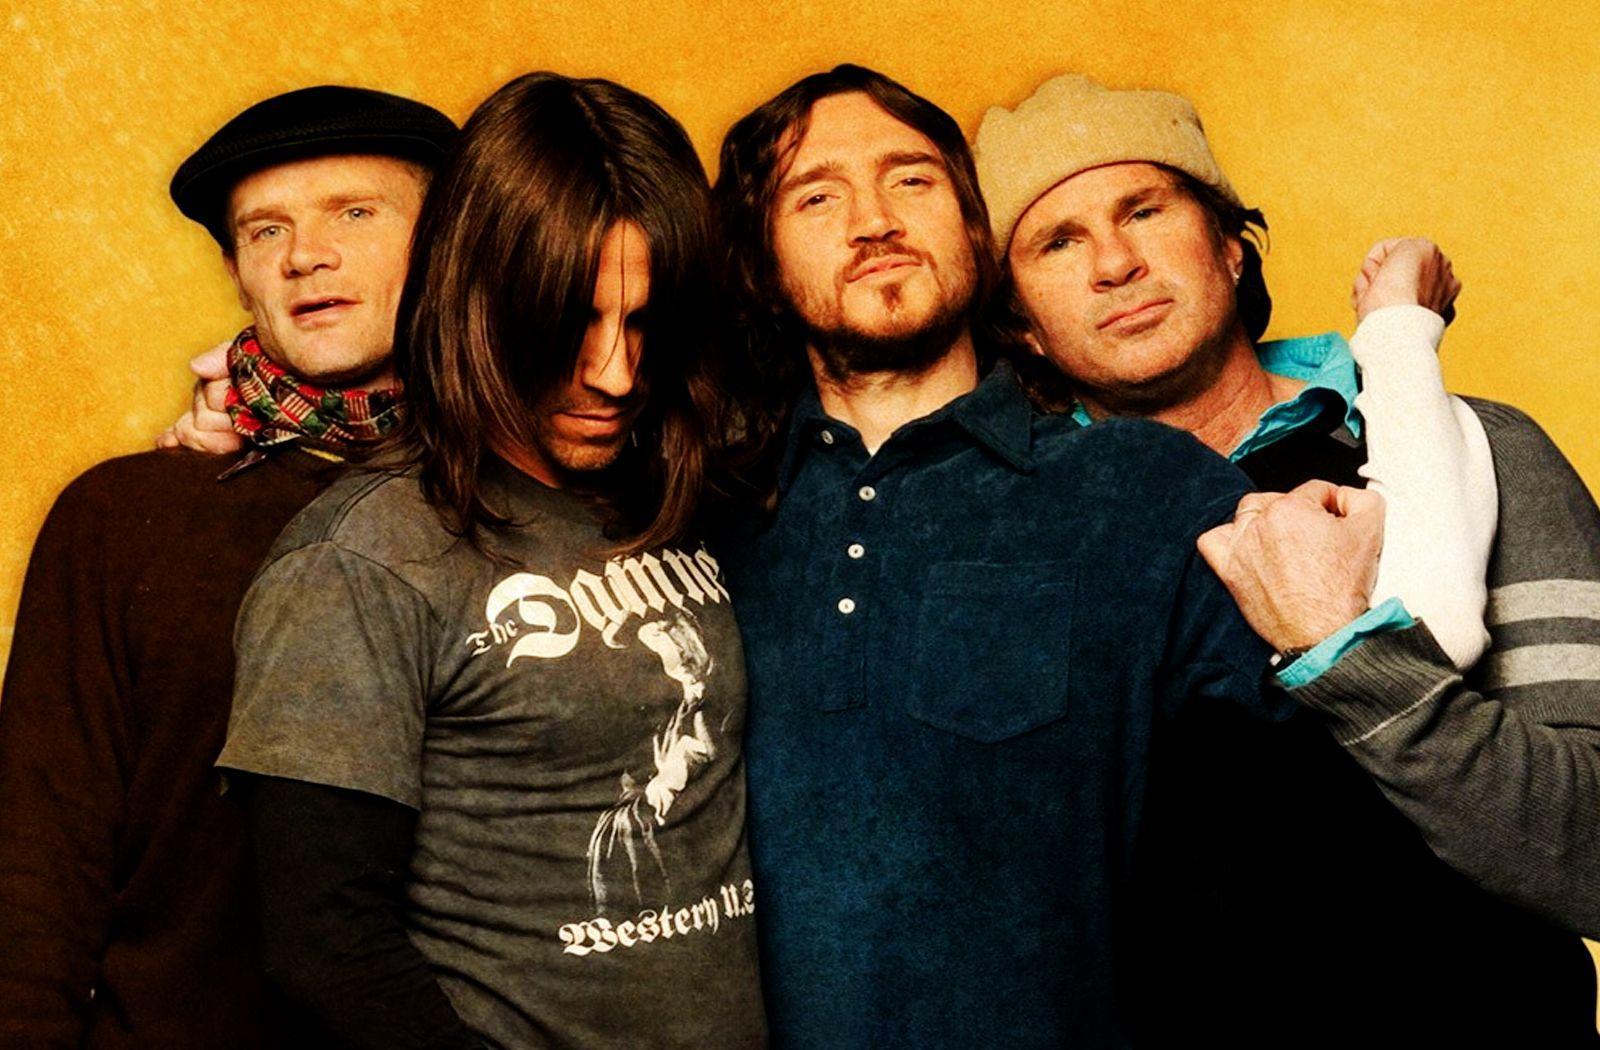 John Frusciante is back in Red Hot Chili Peppers